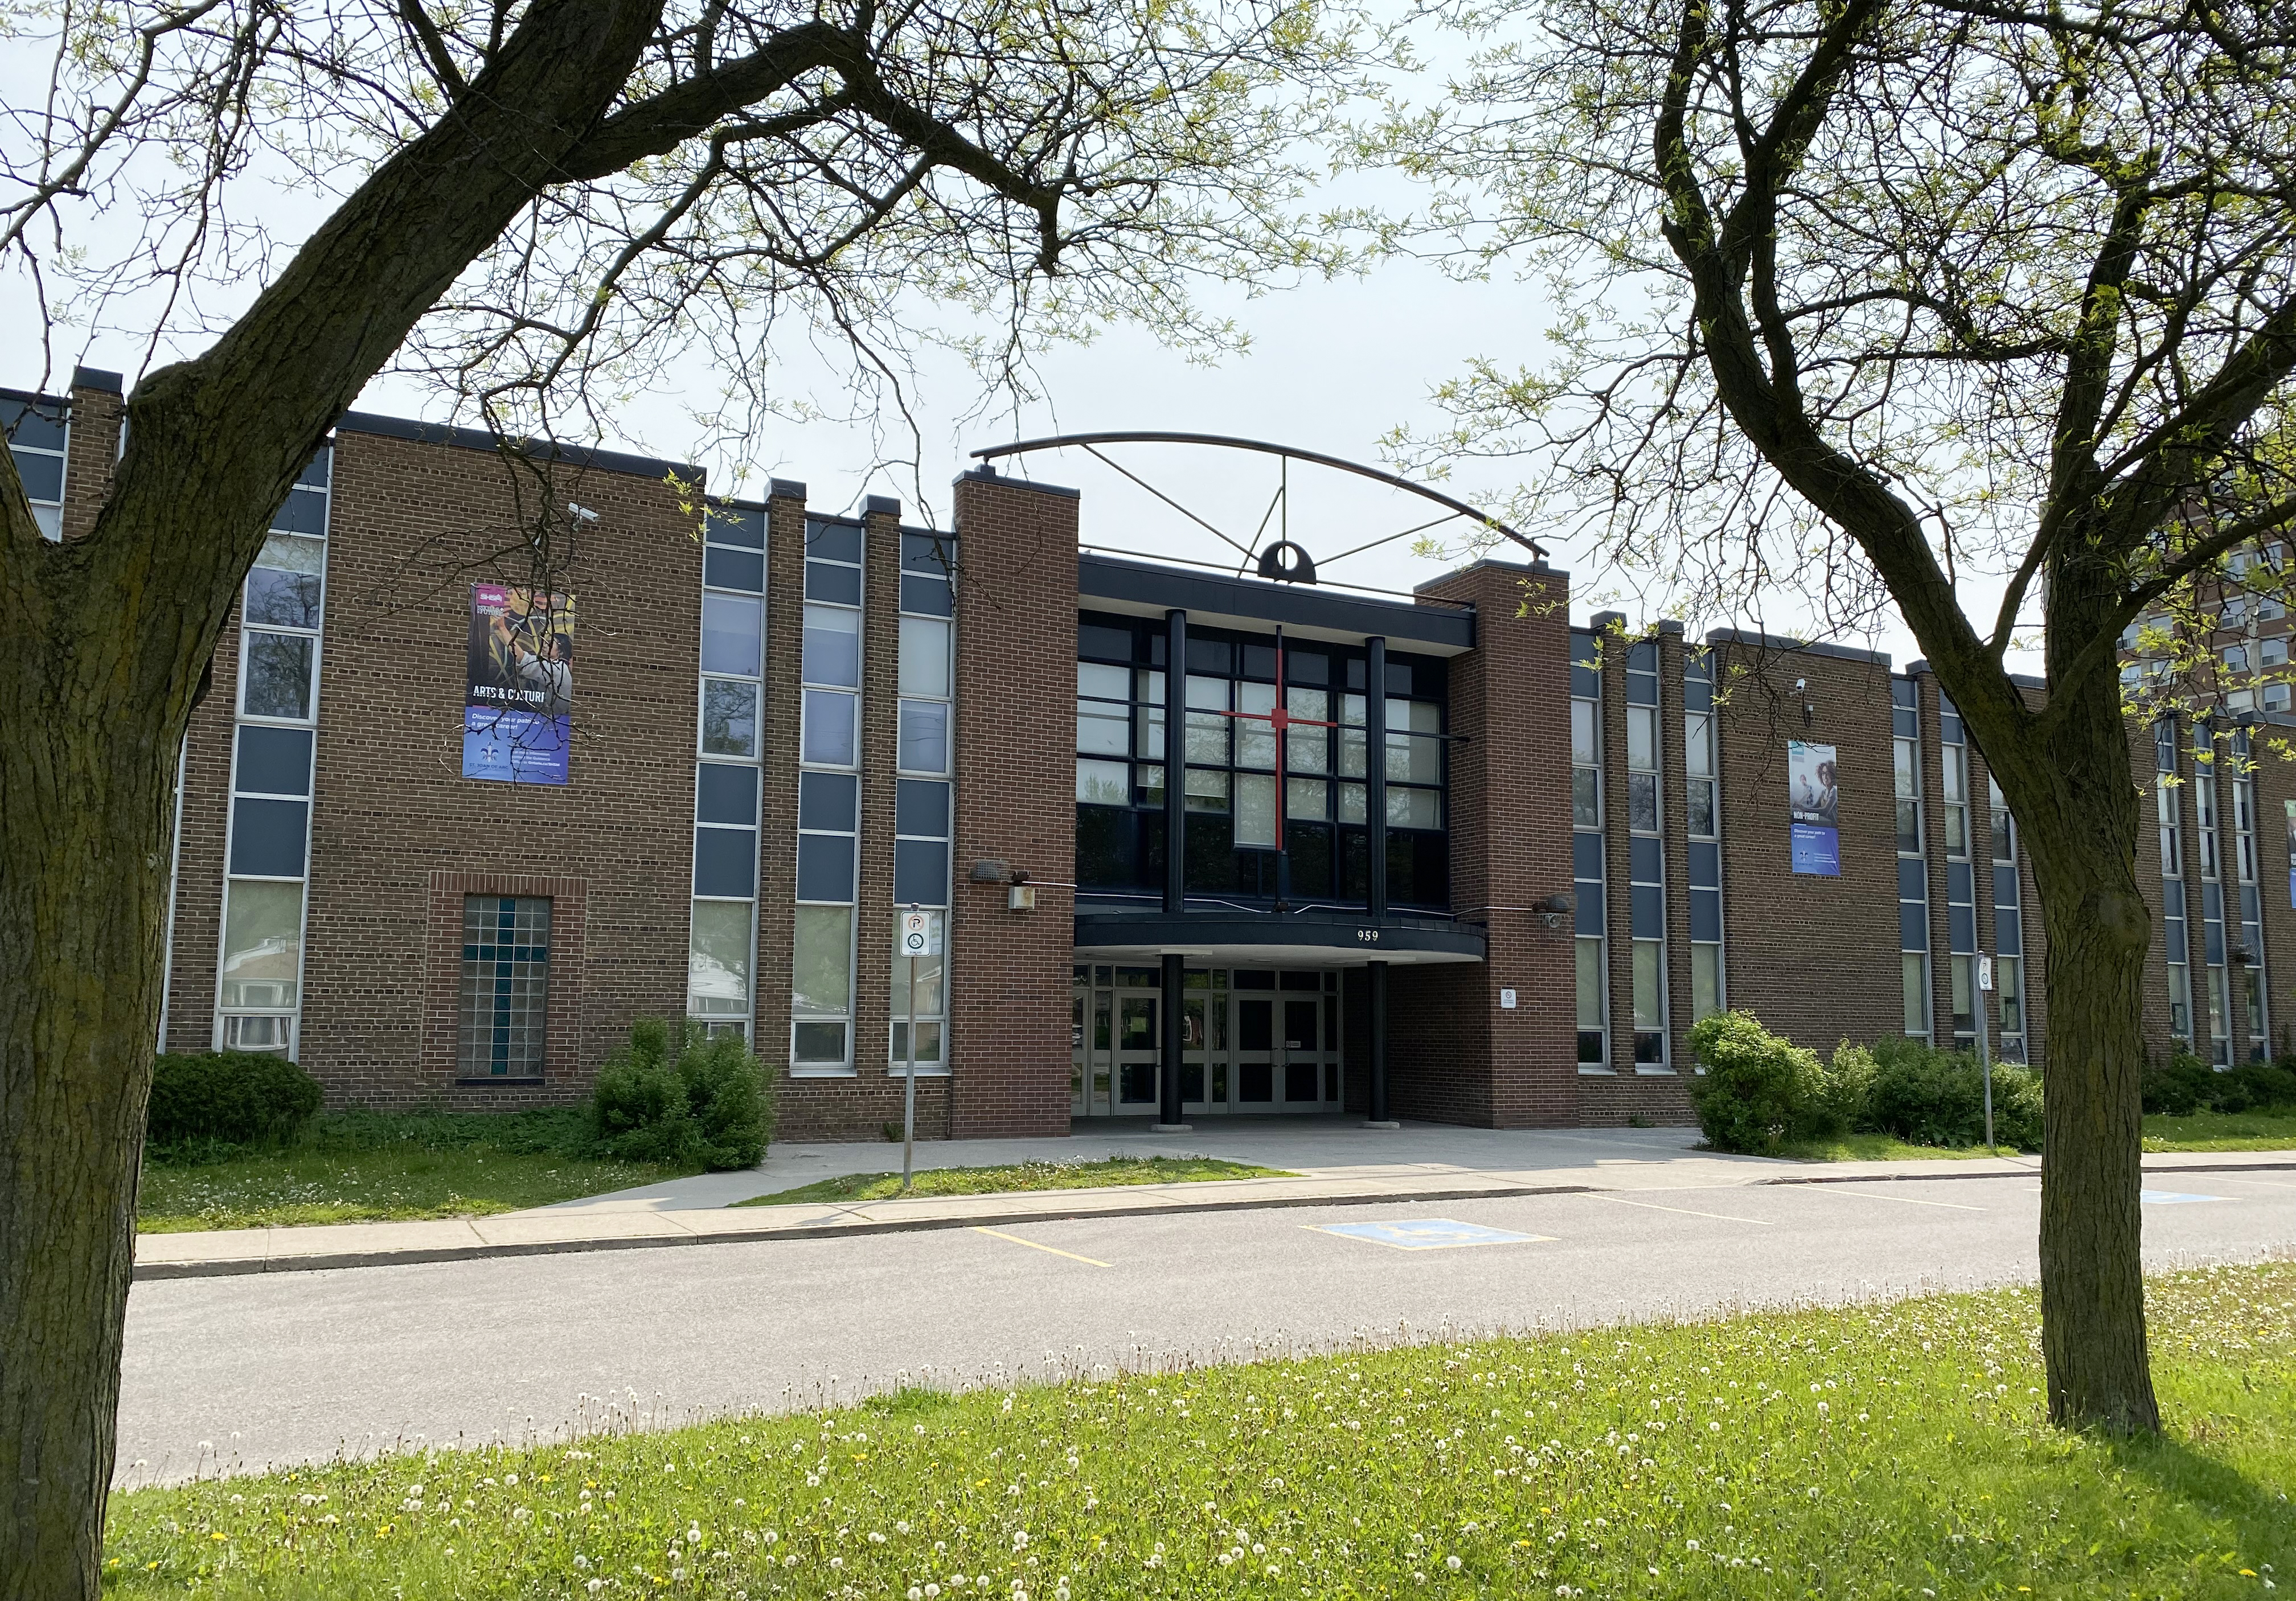 The front of the St. Joan of Arc Catholic Academy school building